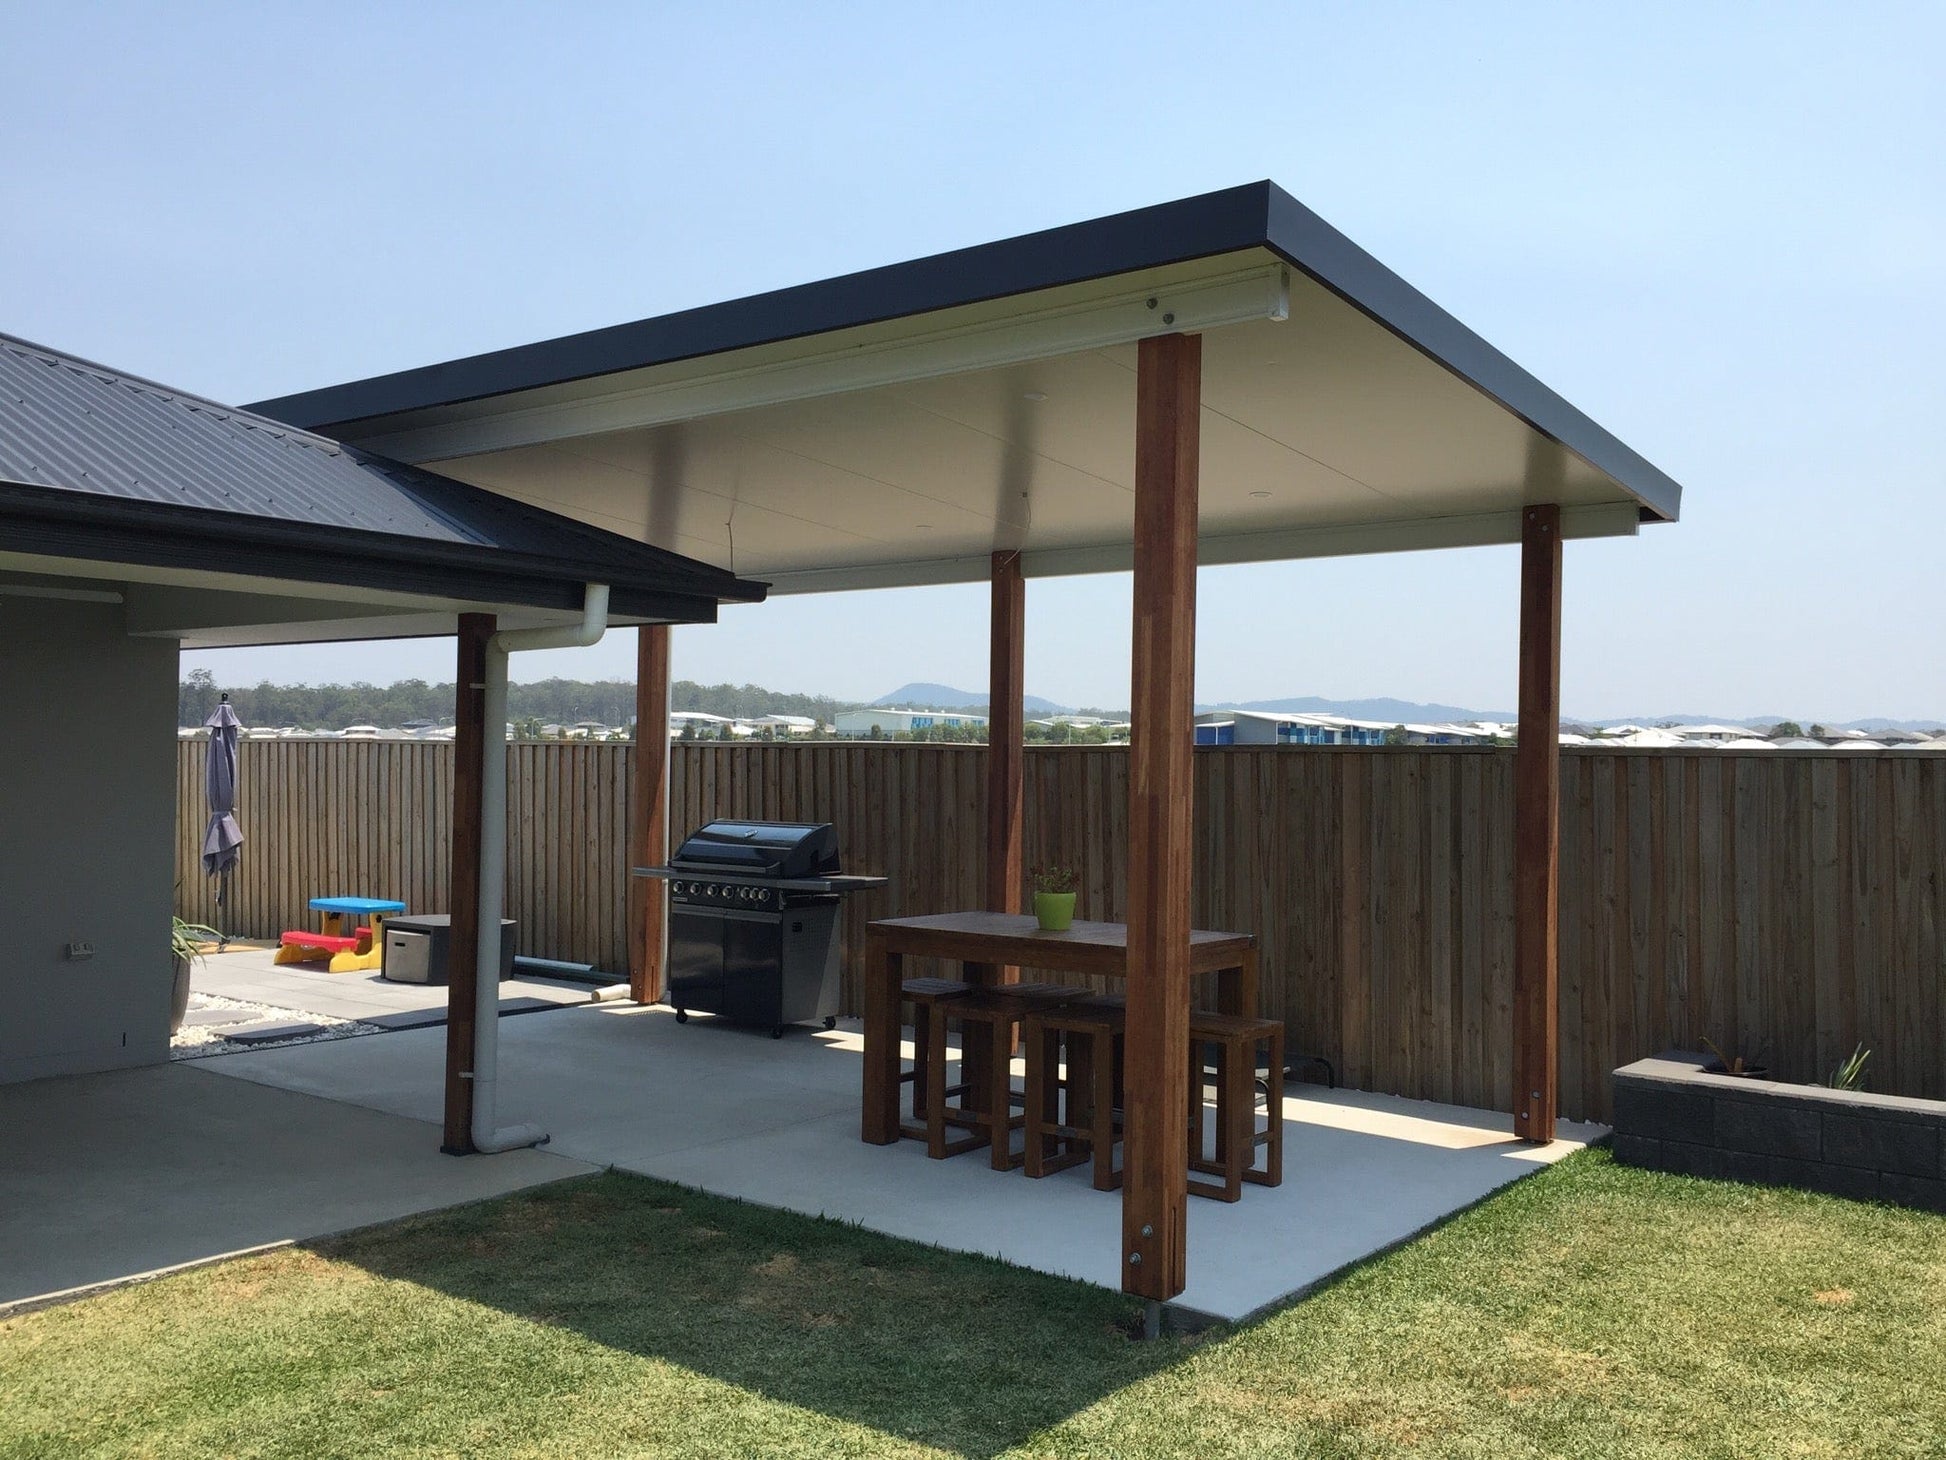 Insulated Flyover Patio Roof- 12m x 3m- Supply & Install QHI National